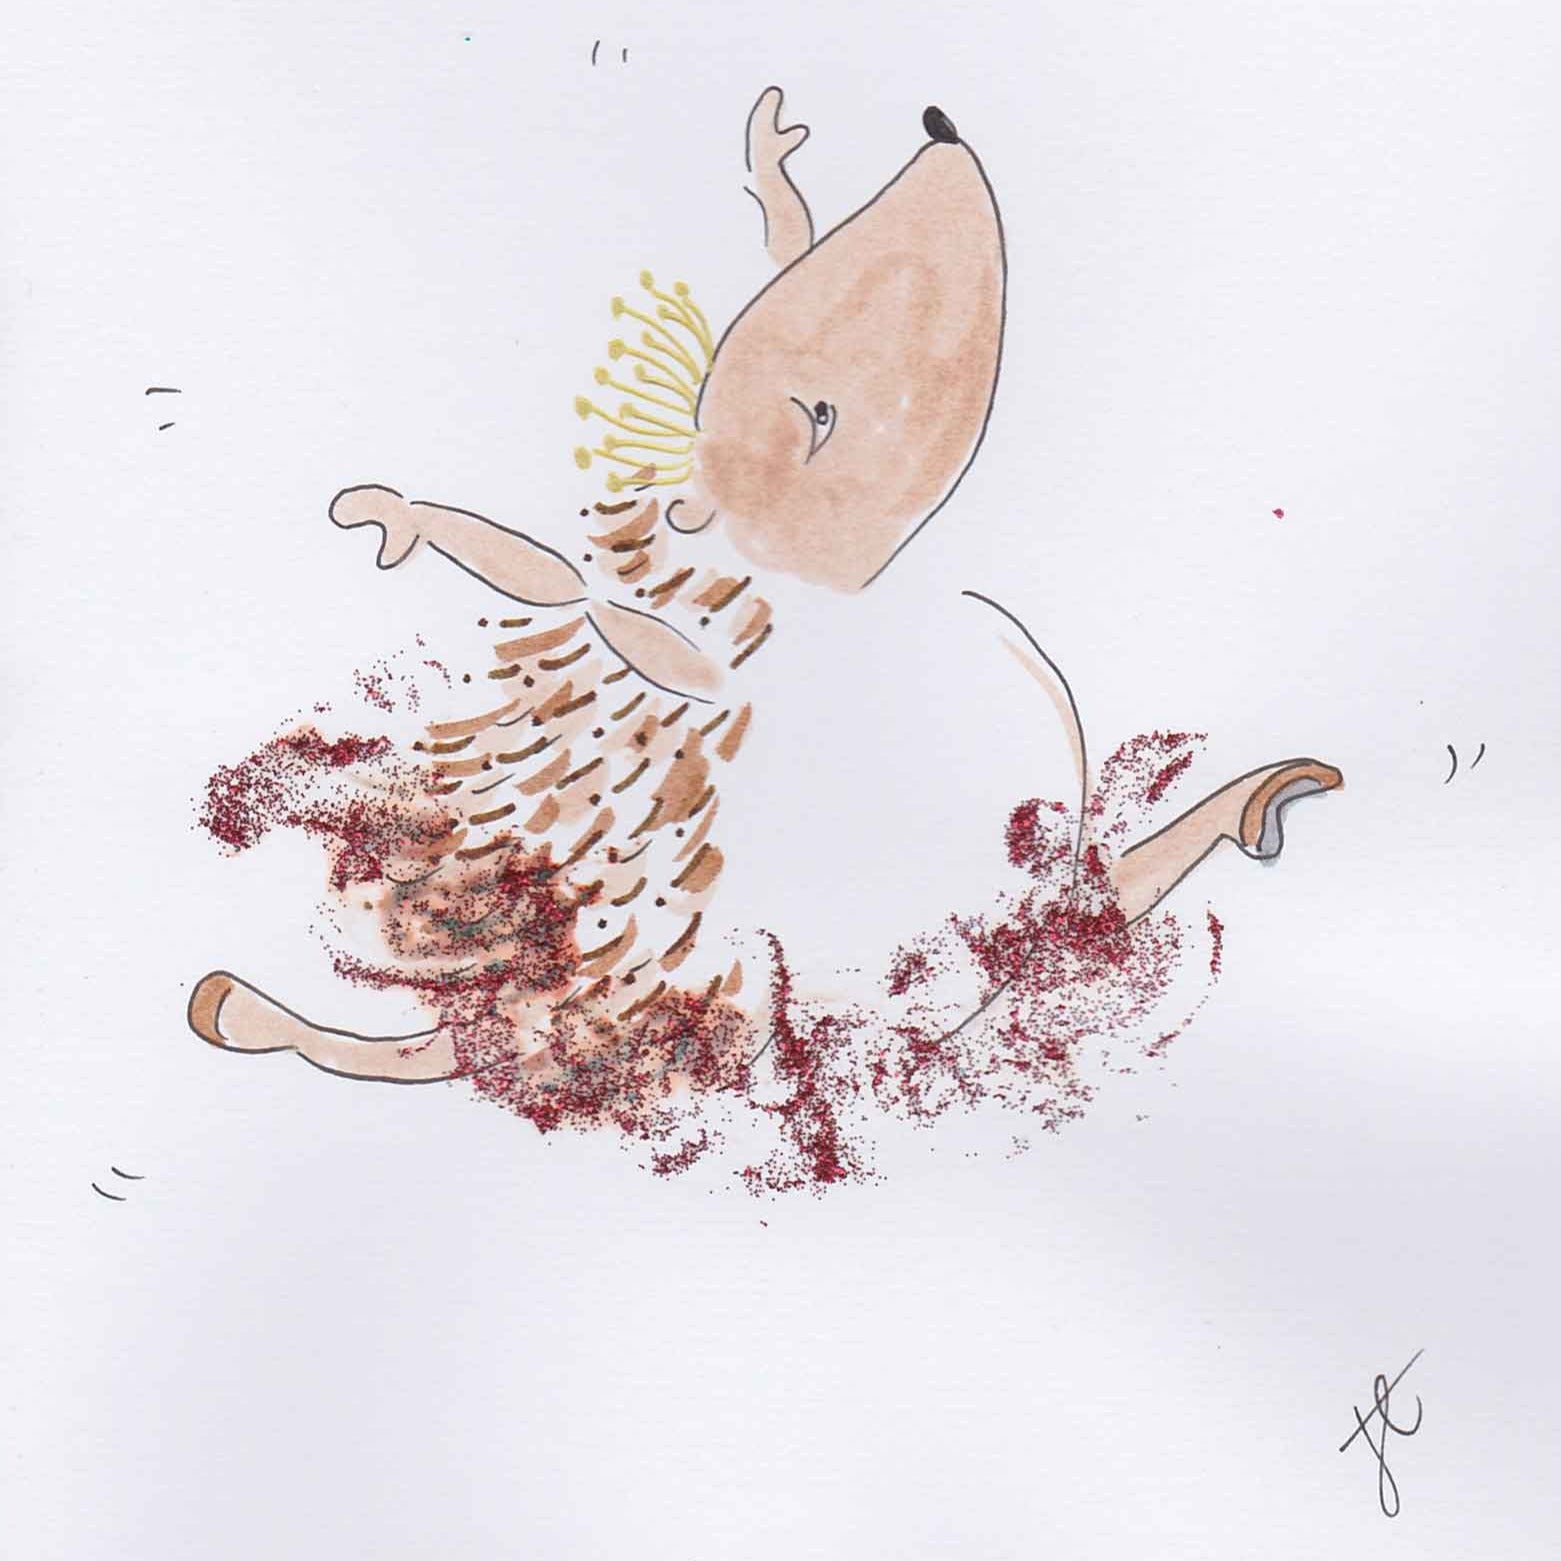 Hedgie Ballettoons with glitter tutu in grand jete pose